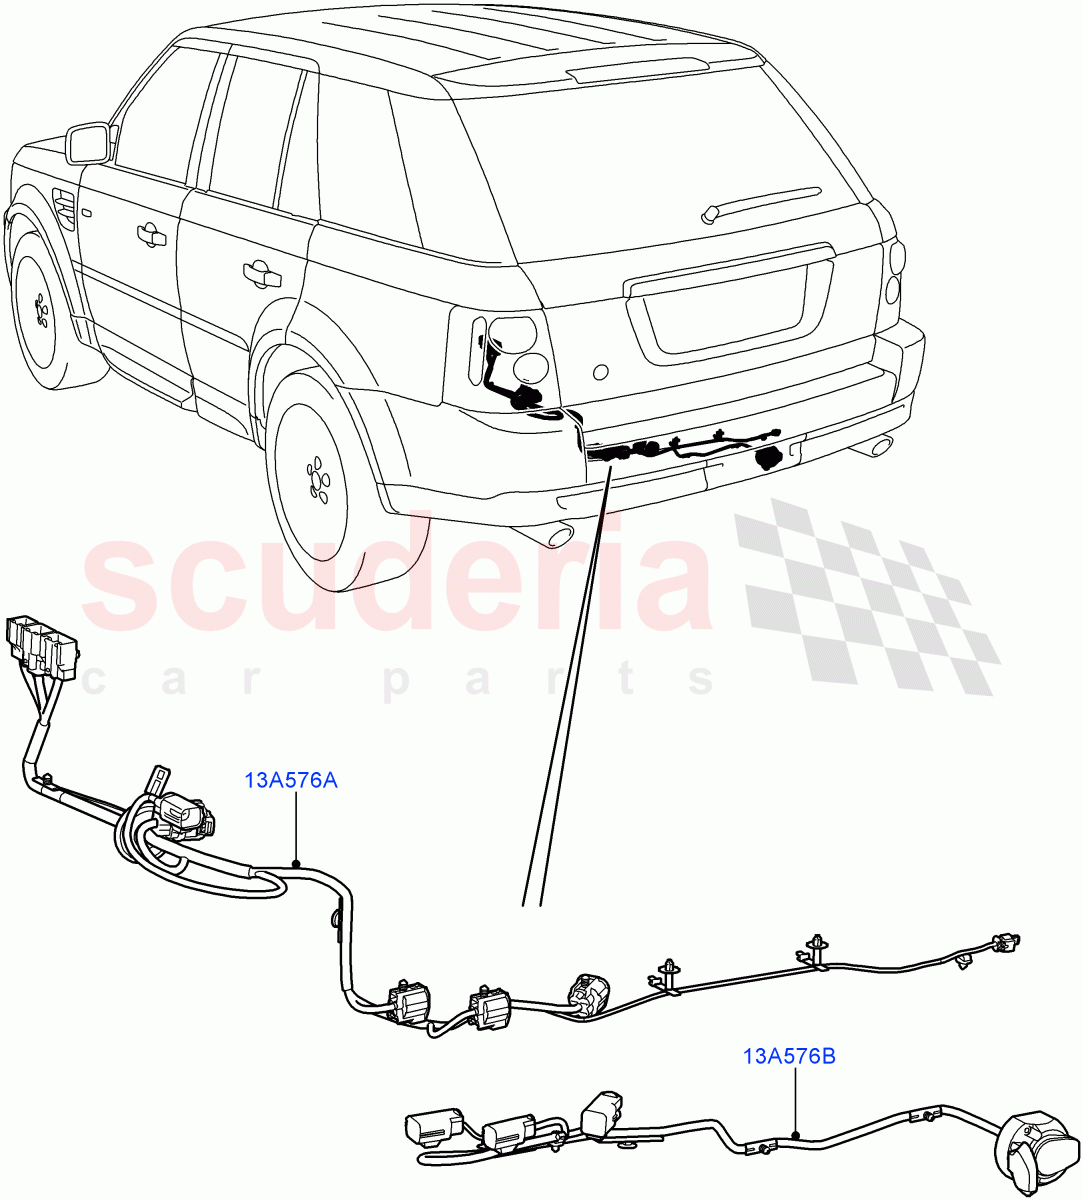 Electrical Wiring - Body And Rear(Towing)((V)FROMAA000001) of Land Rover Land Rover Range Rover Sport (2010-2013) [5.0 OHC SGDI NA V8 Petrol]